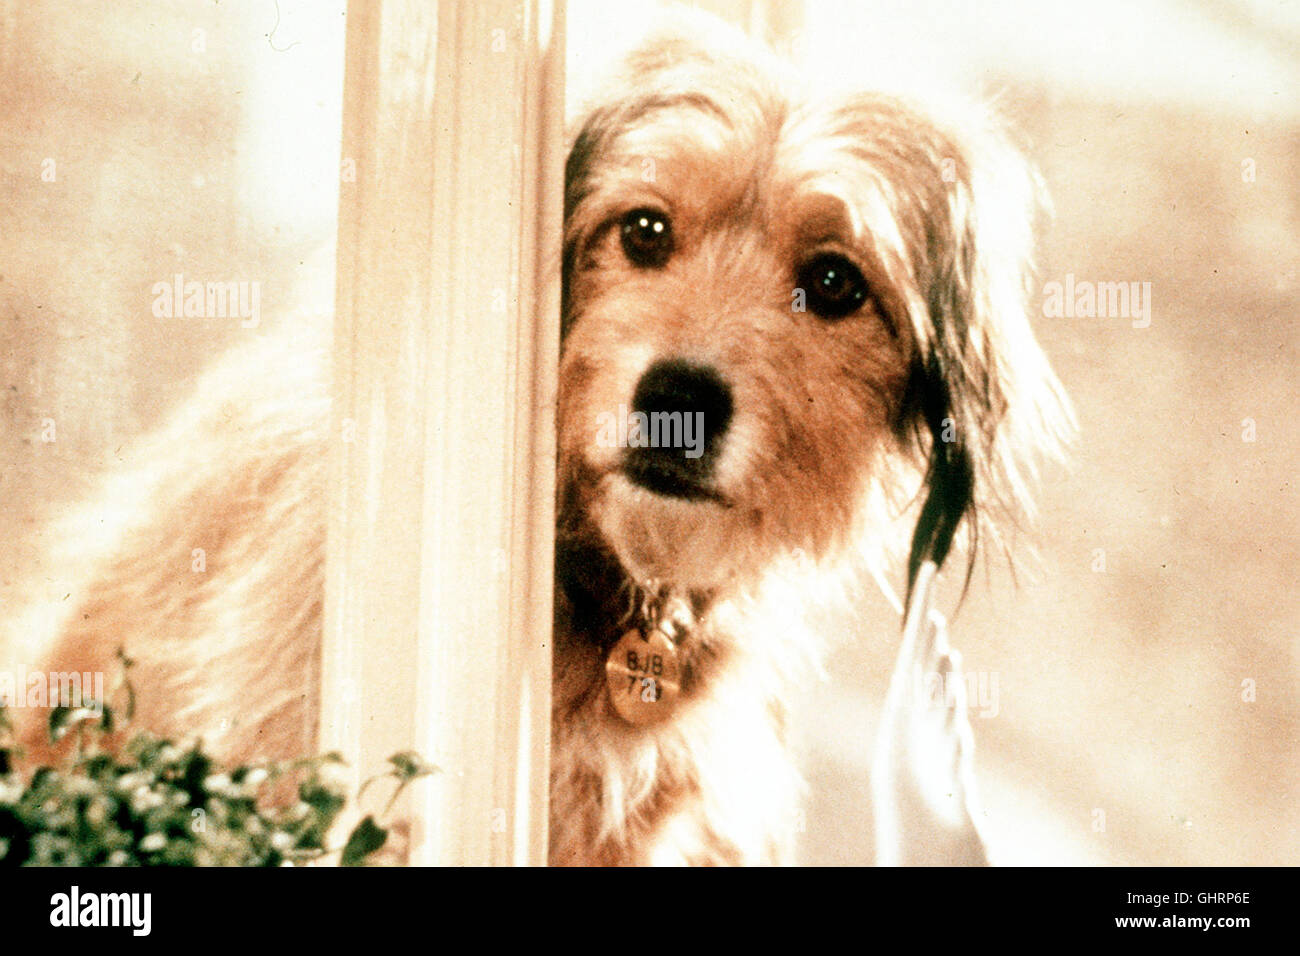 1974 stock photography and - Alamy